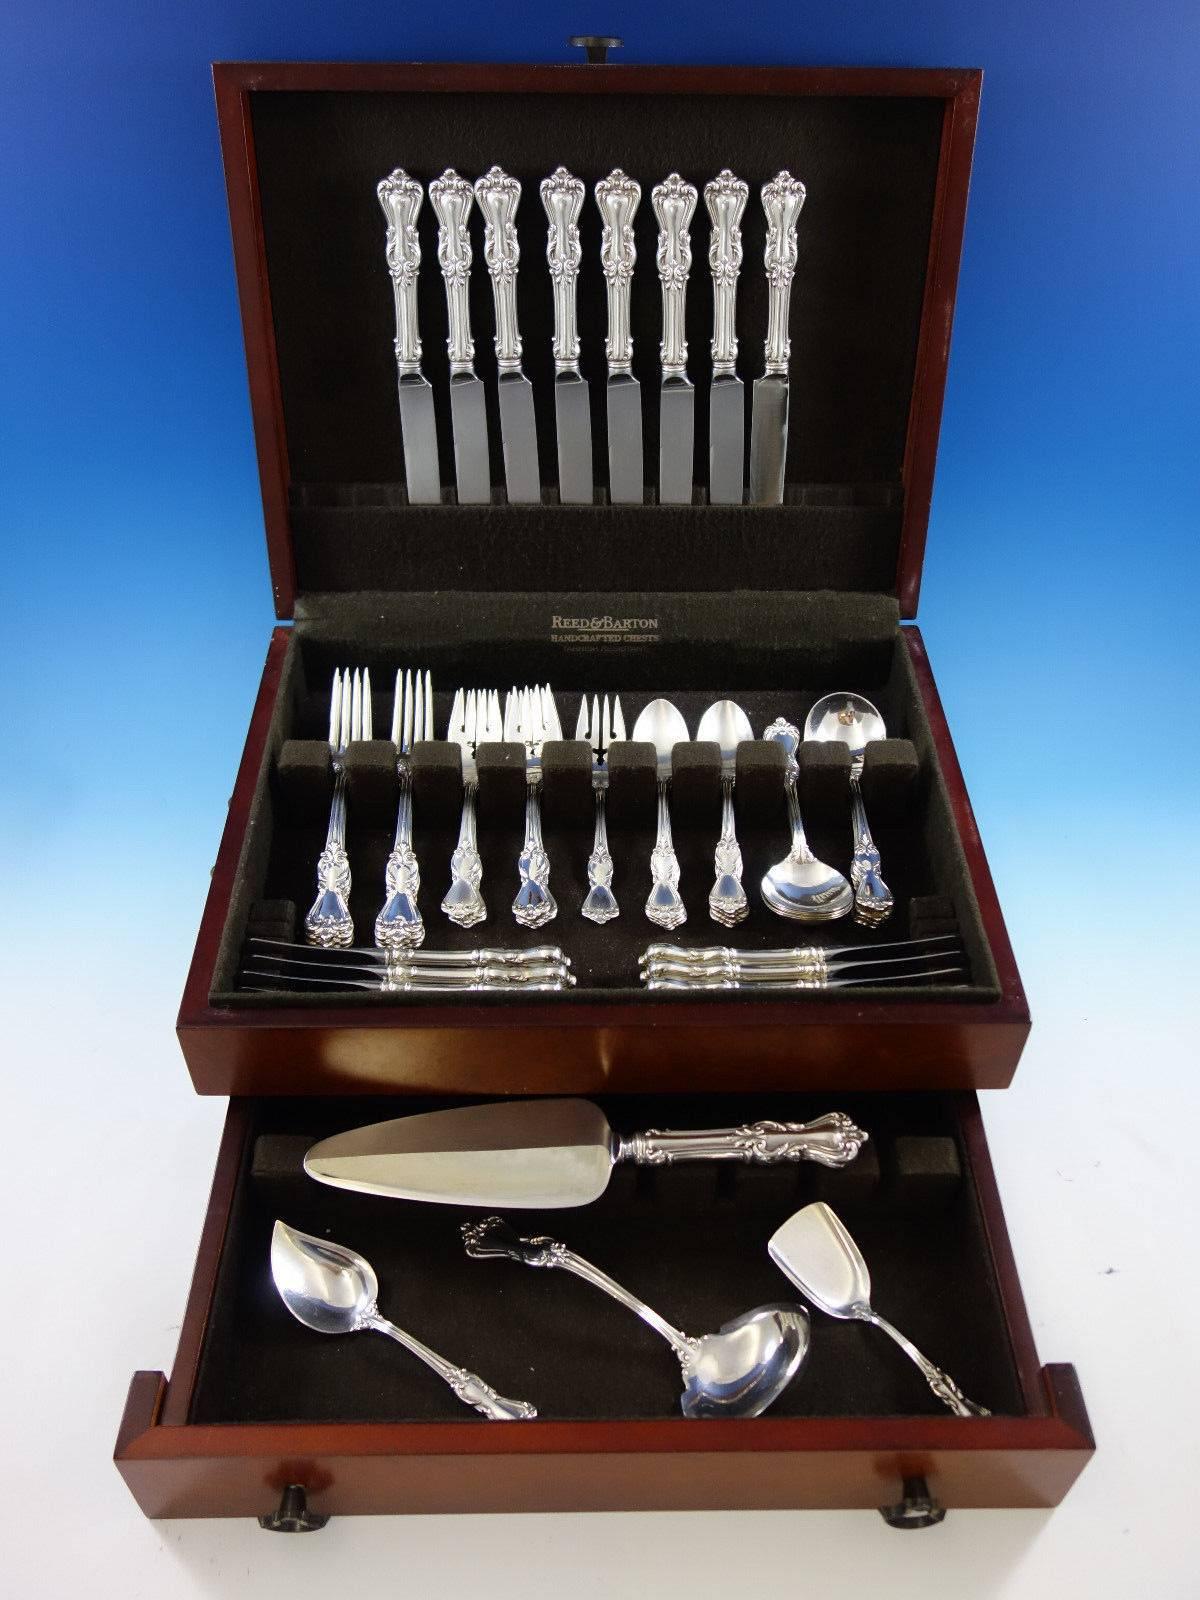 Marlborough by Reed and Barton sterling silver flatware set - 52 pieces. This set includes: eight knives, 9 1/8